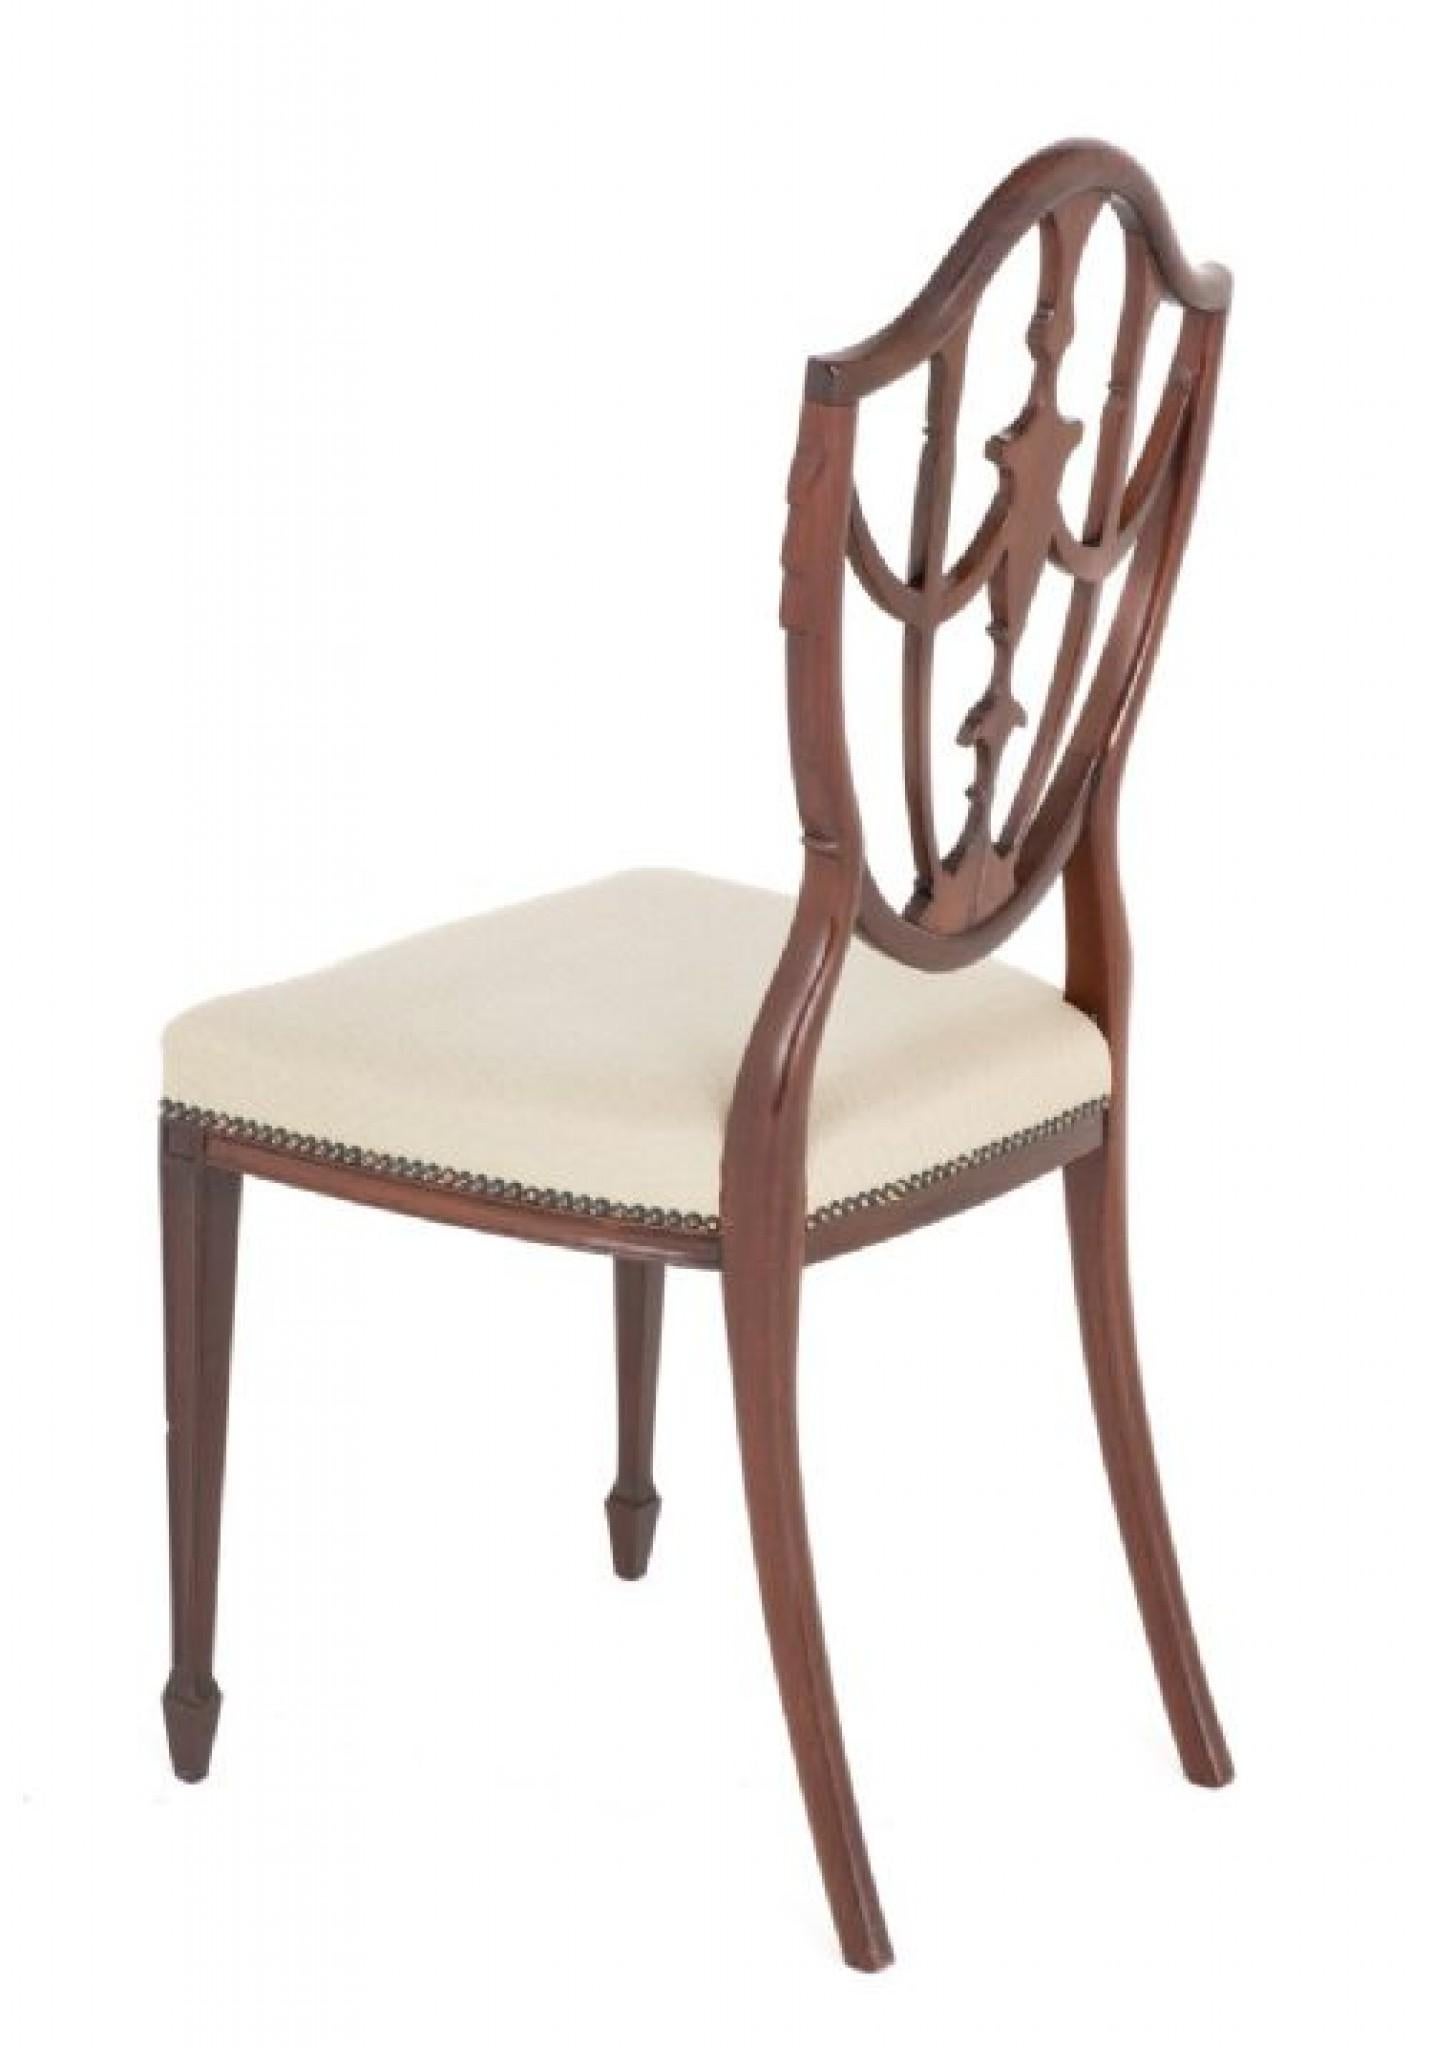 Hepplewhite Side Chair Mahogany Revival 1900 For Sale 3